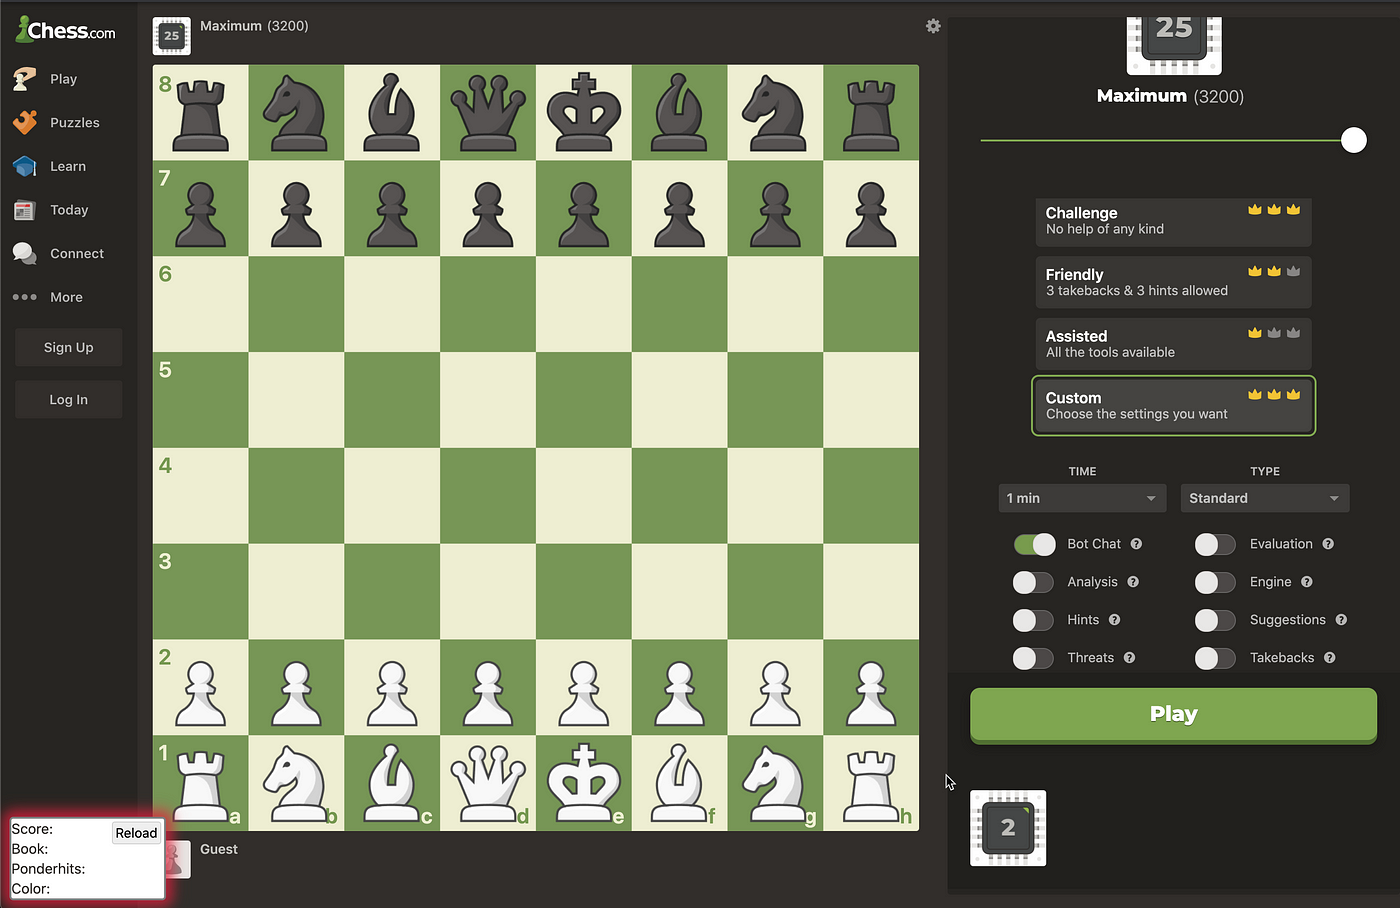 I made a browser extension to analyze chess games with ChatGPT